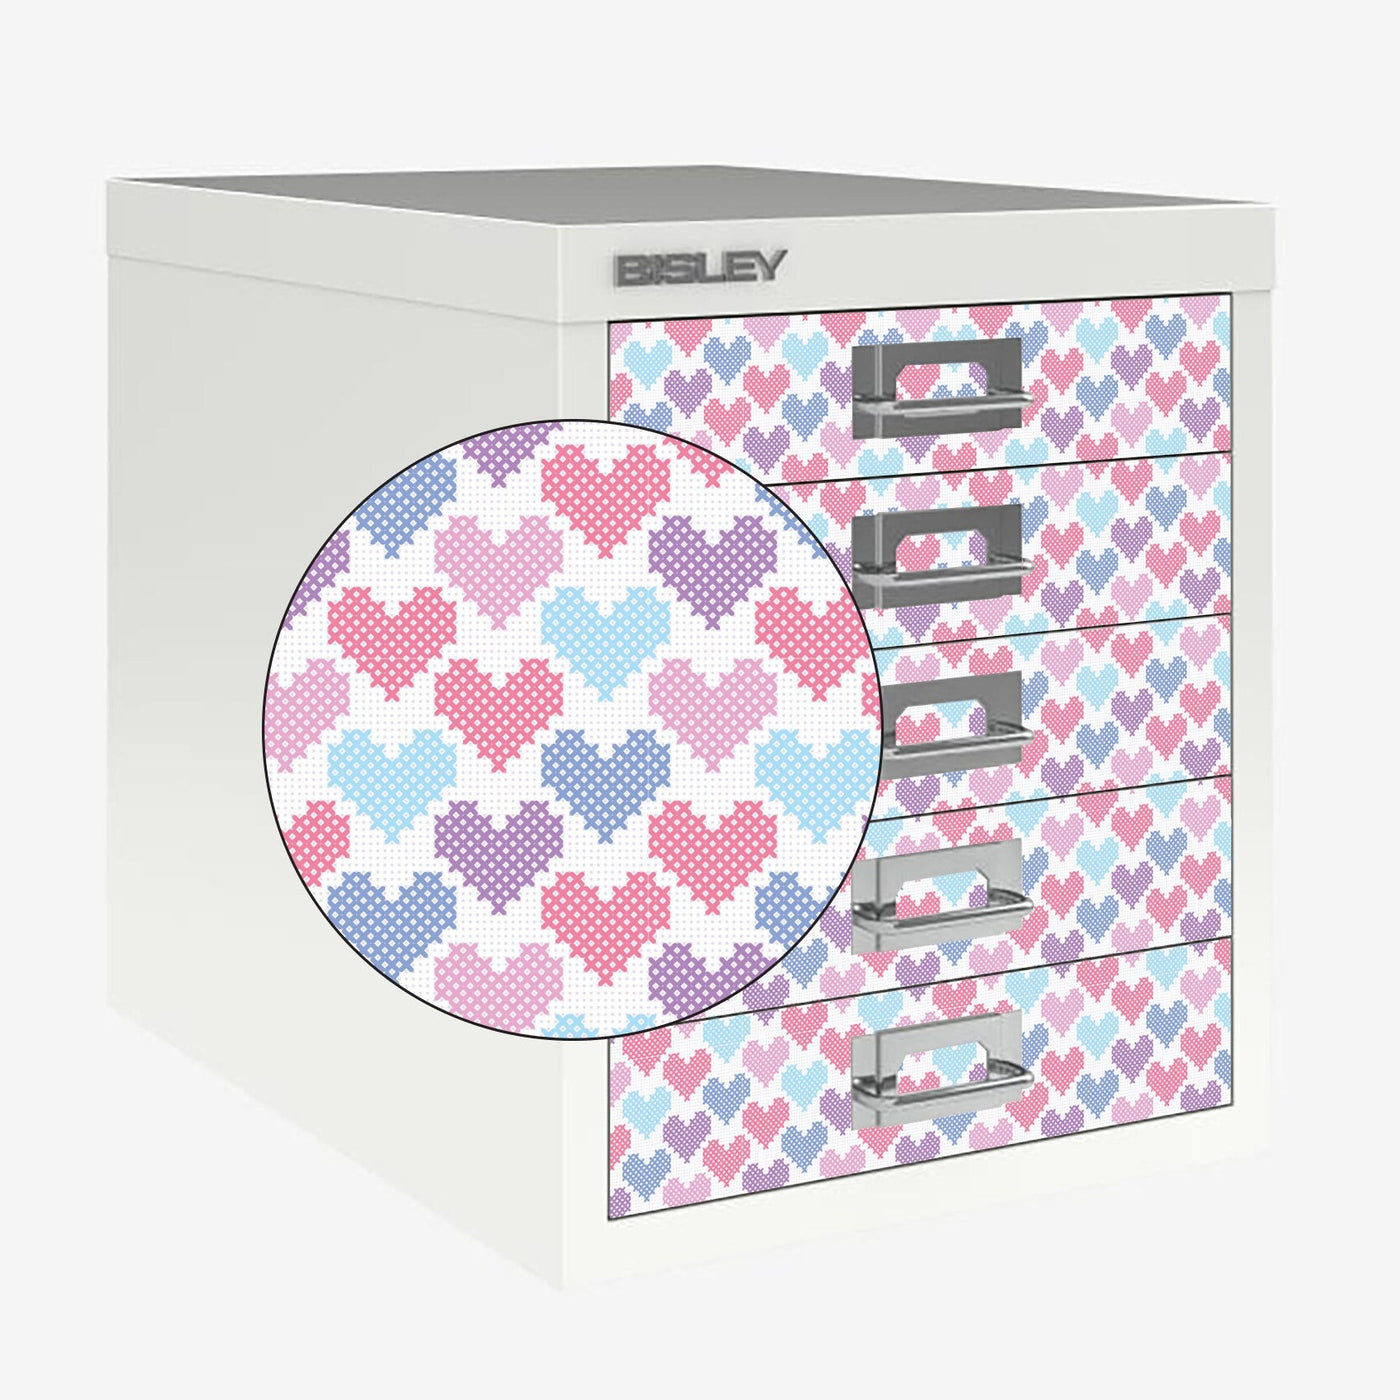 Cross stitch heart decals for Bisley 5 drawer cabinet (not included)